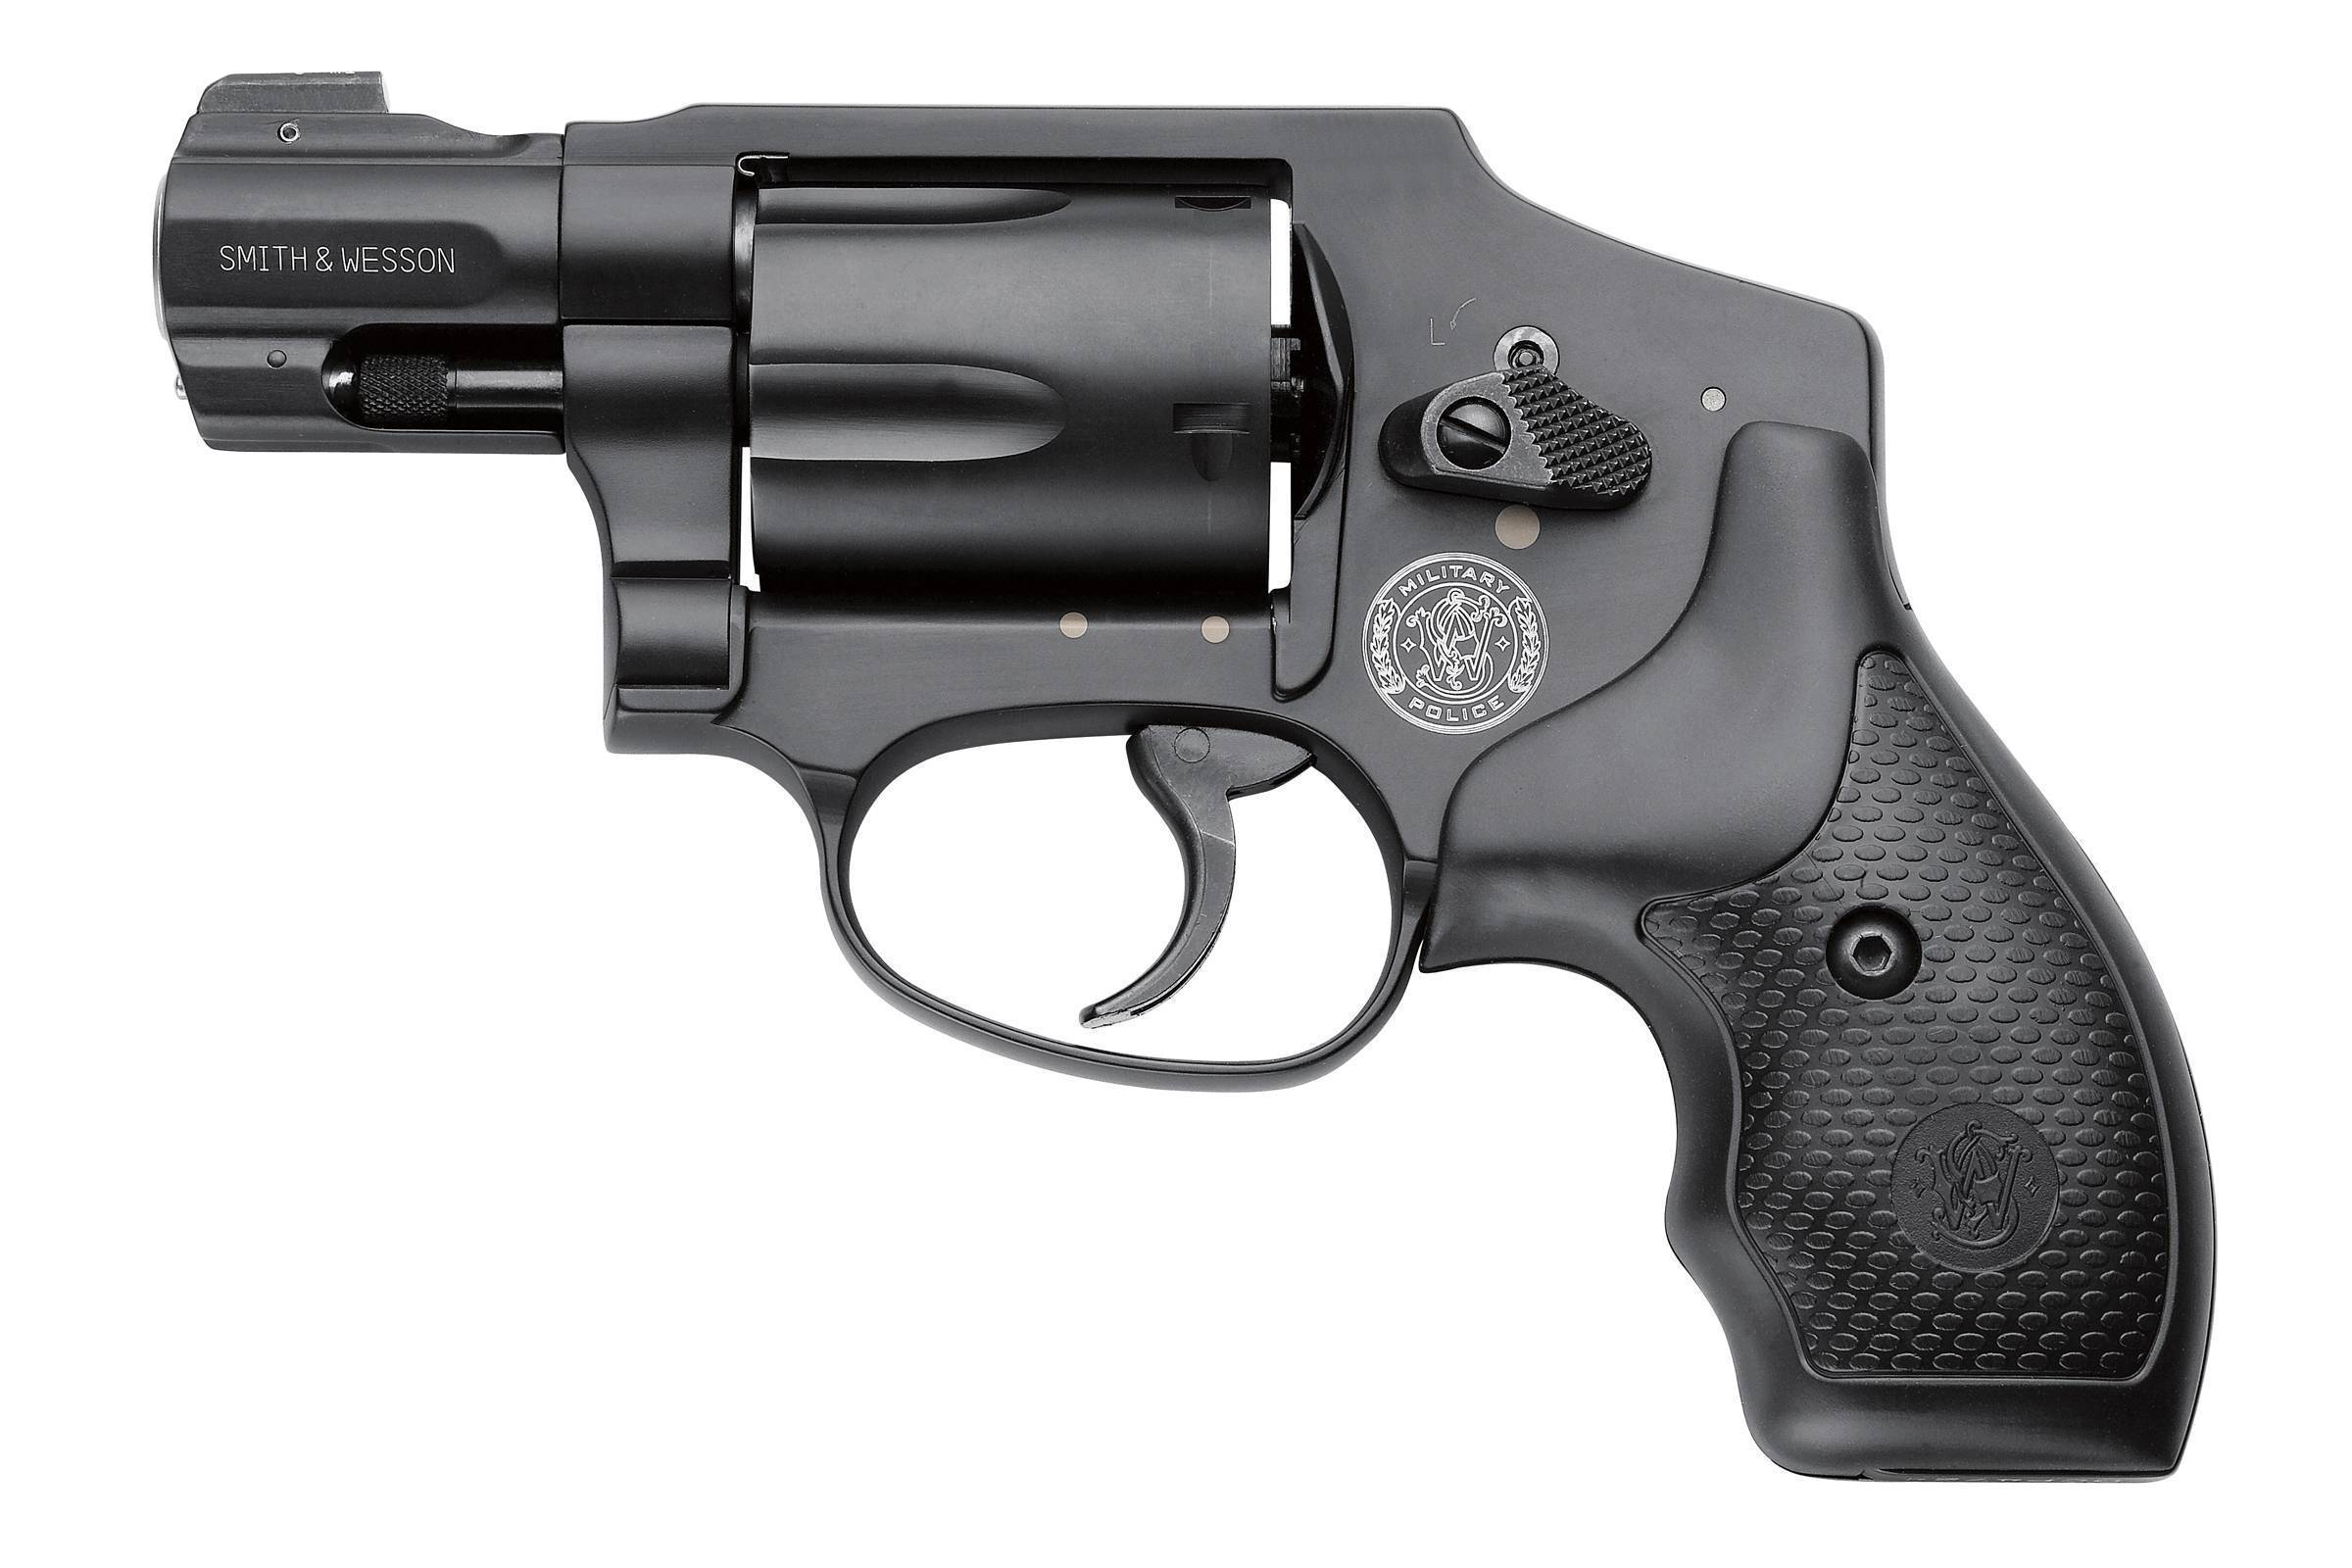 Smith & wesson 5900 pistol series